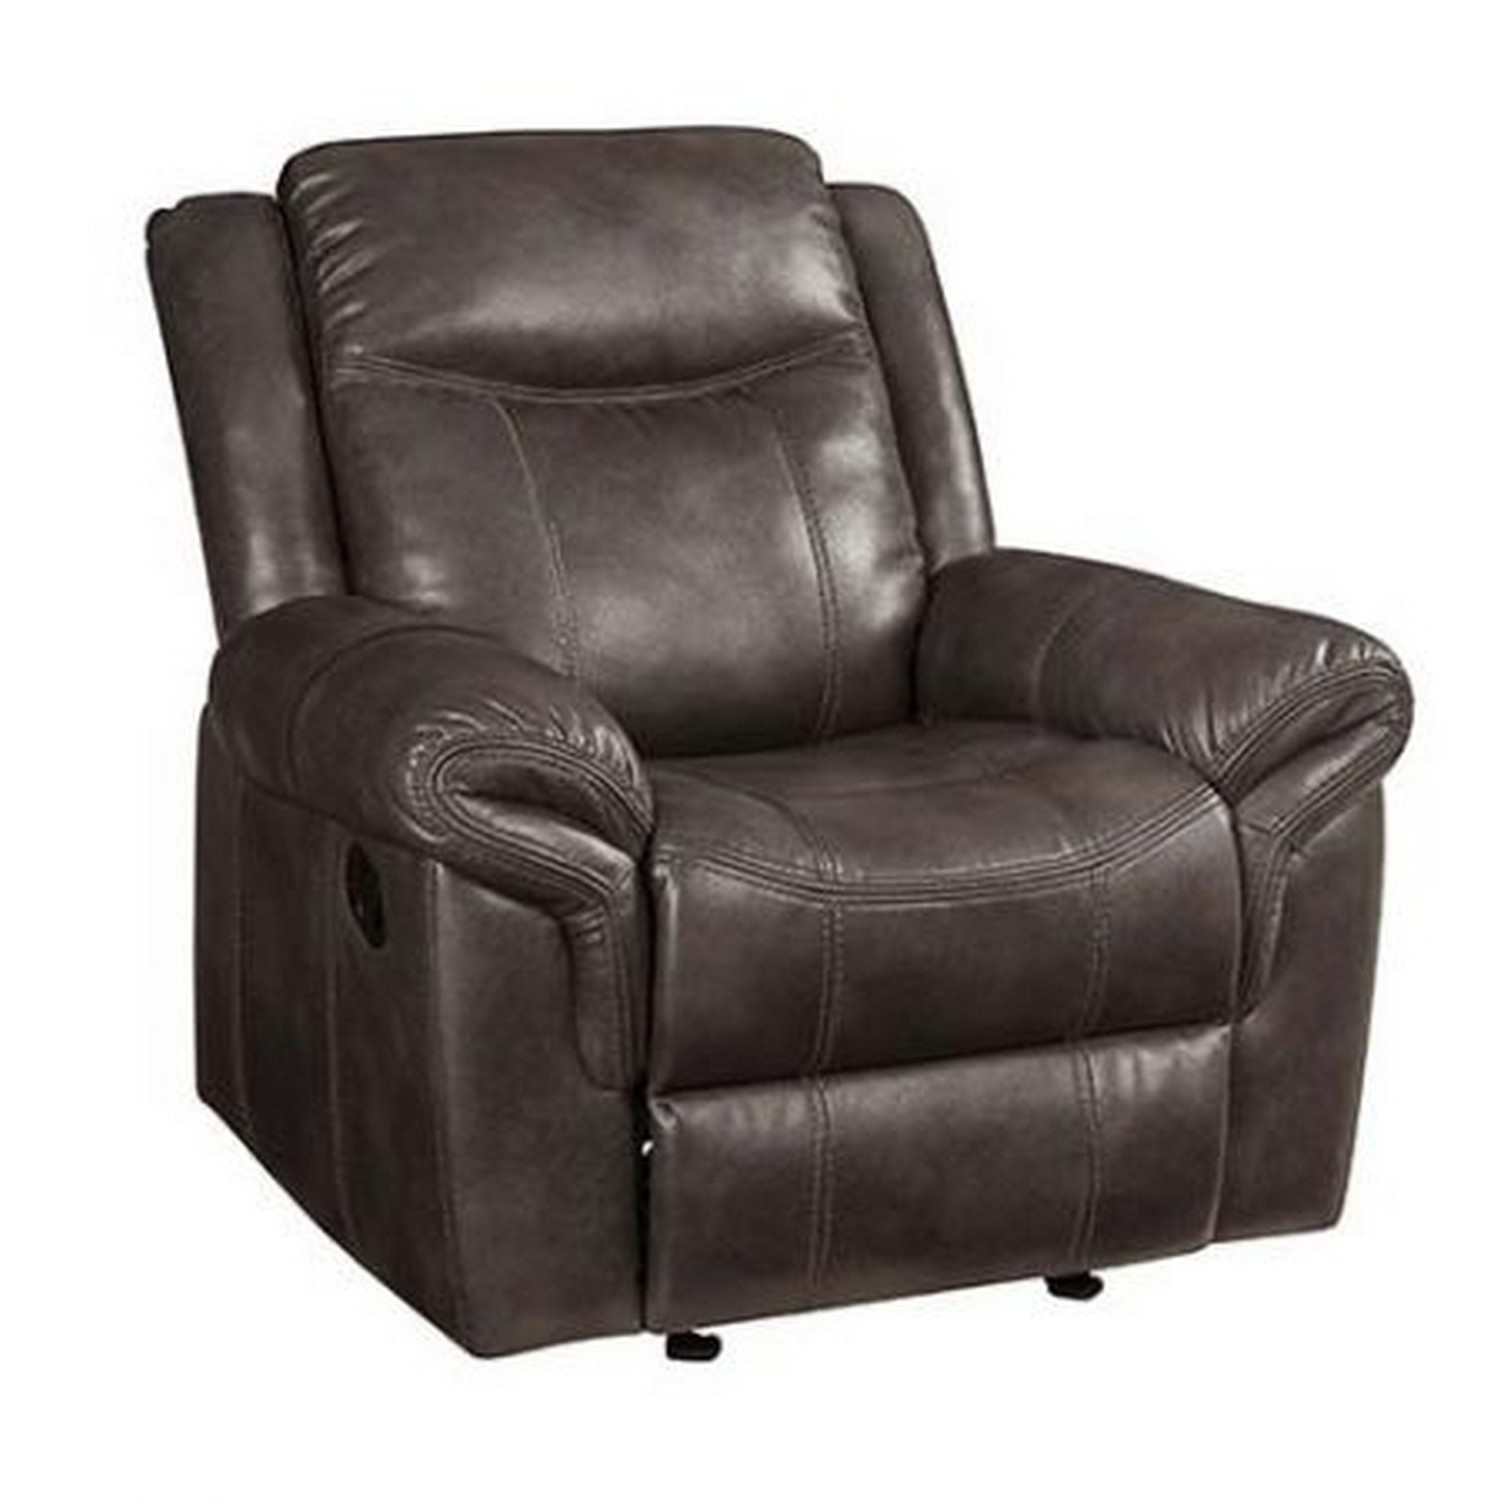 Glider Recliner With Leatherette Upholstery And Pillow Arms, Brown- Saltoro Sherpi